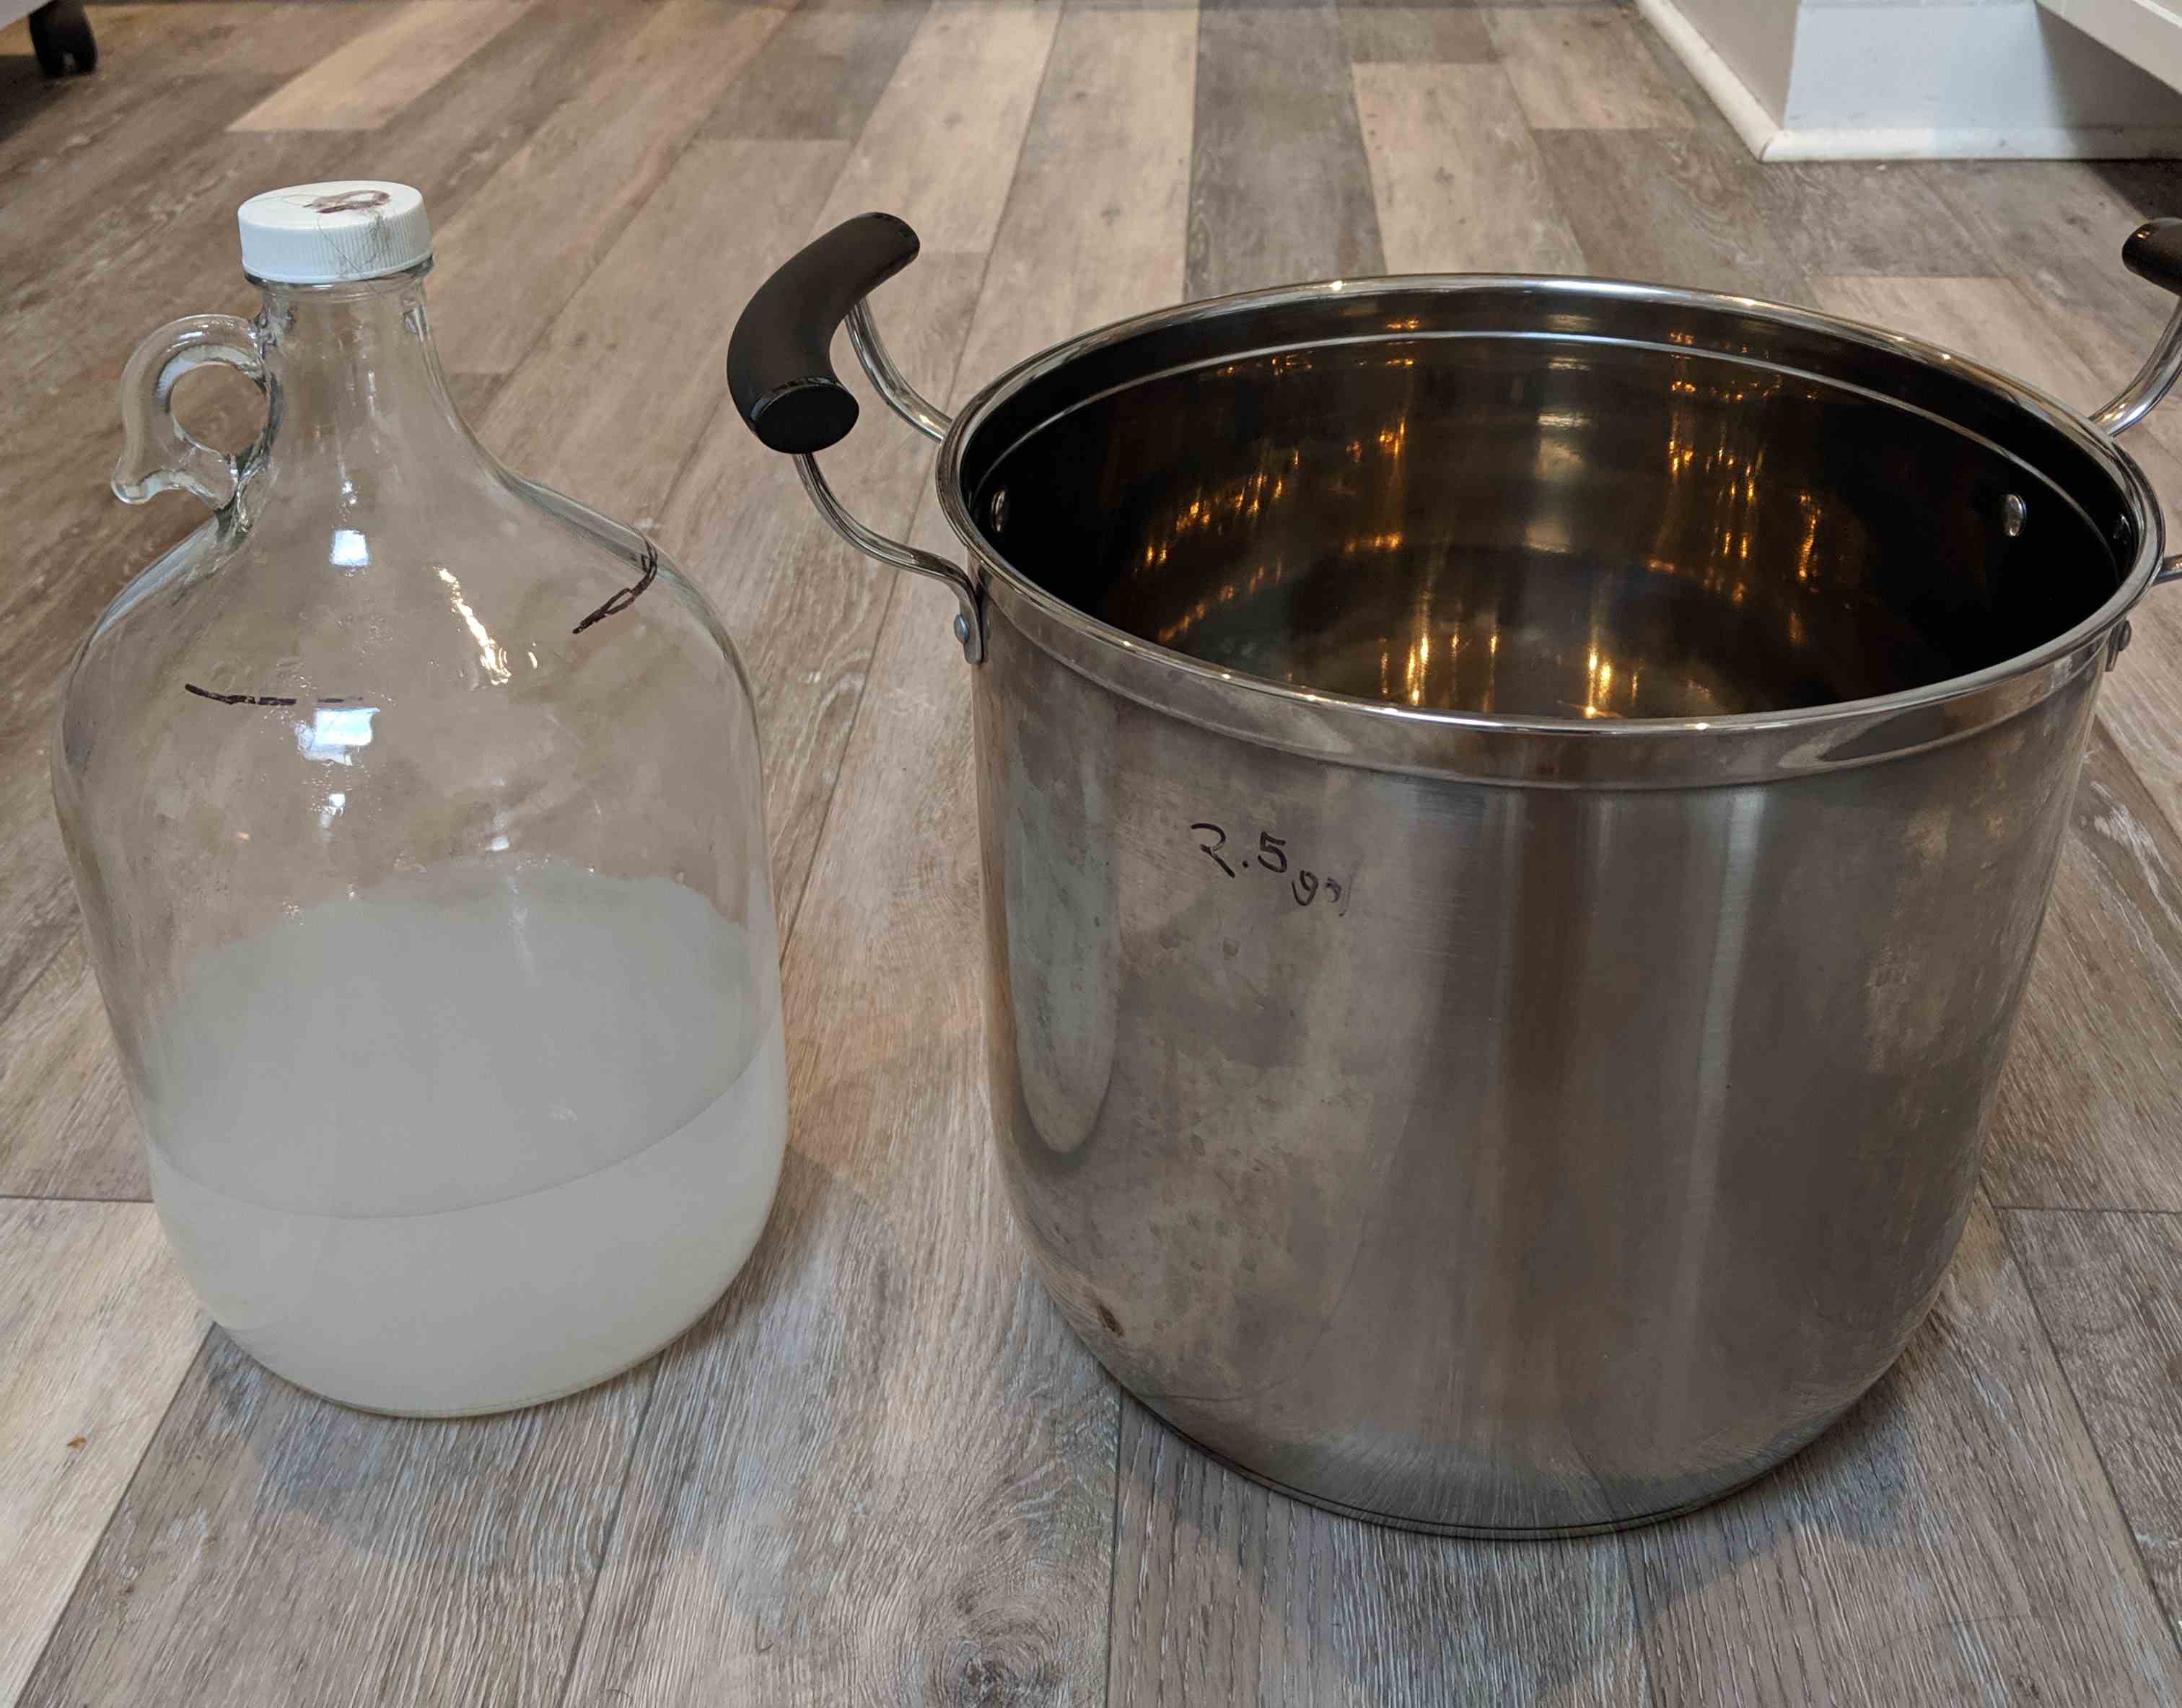 Left, a glass carboy filled with sanitizer. Right, an empty stainless steel stockpot